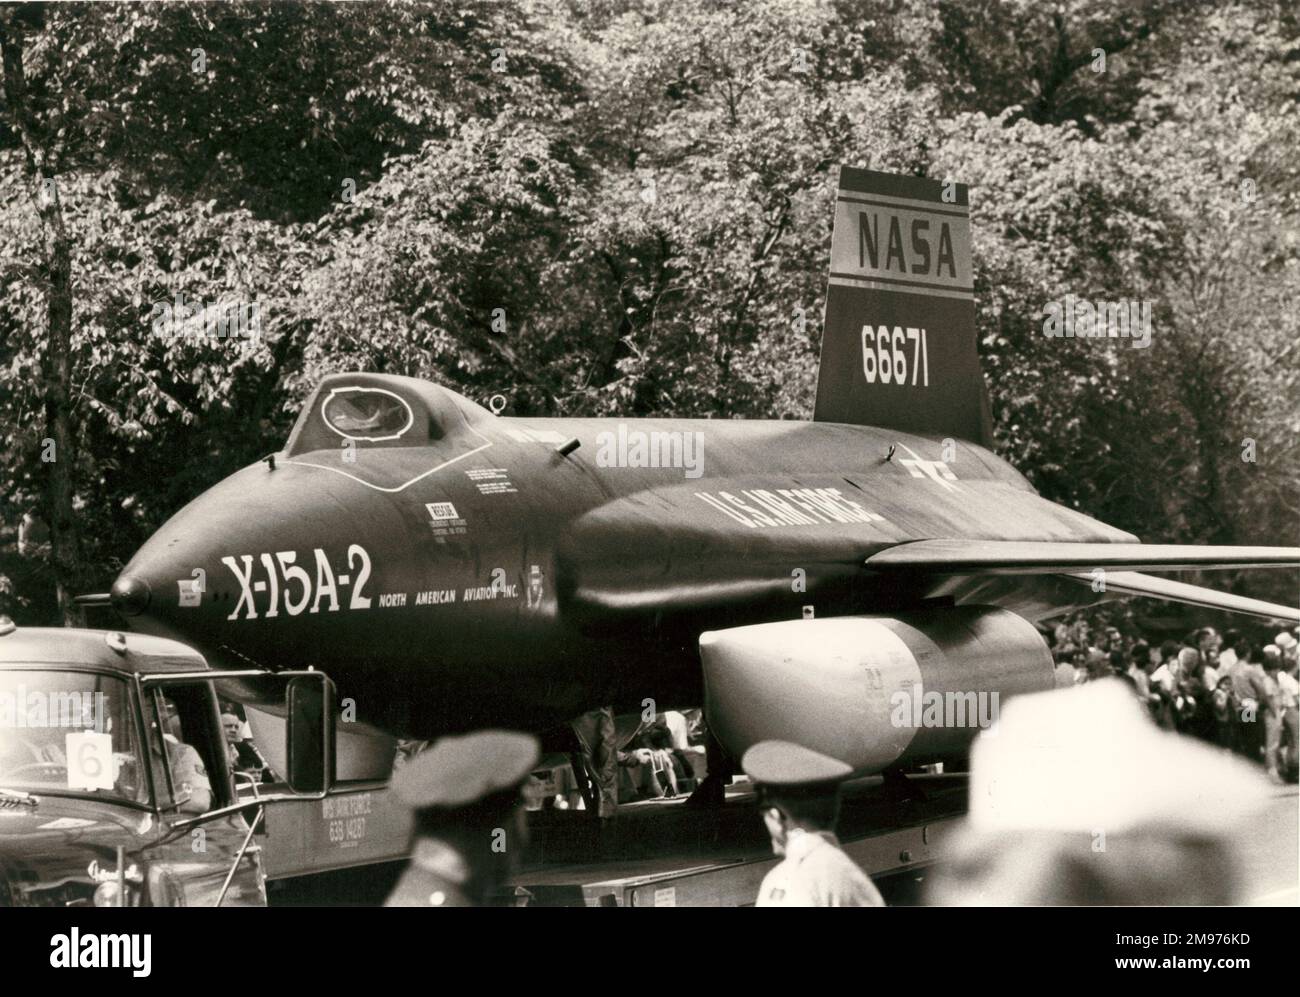 North American X-15A-2, 56-6671, gets a lift on a lorry. Stock Photo